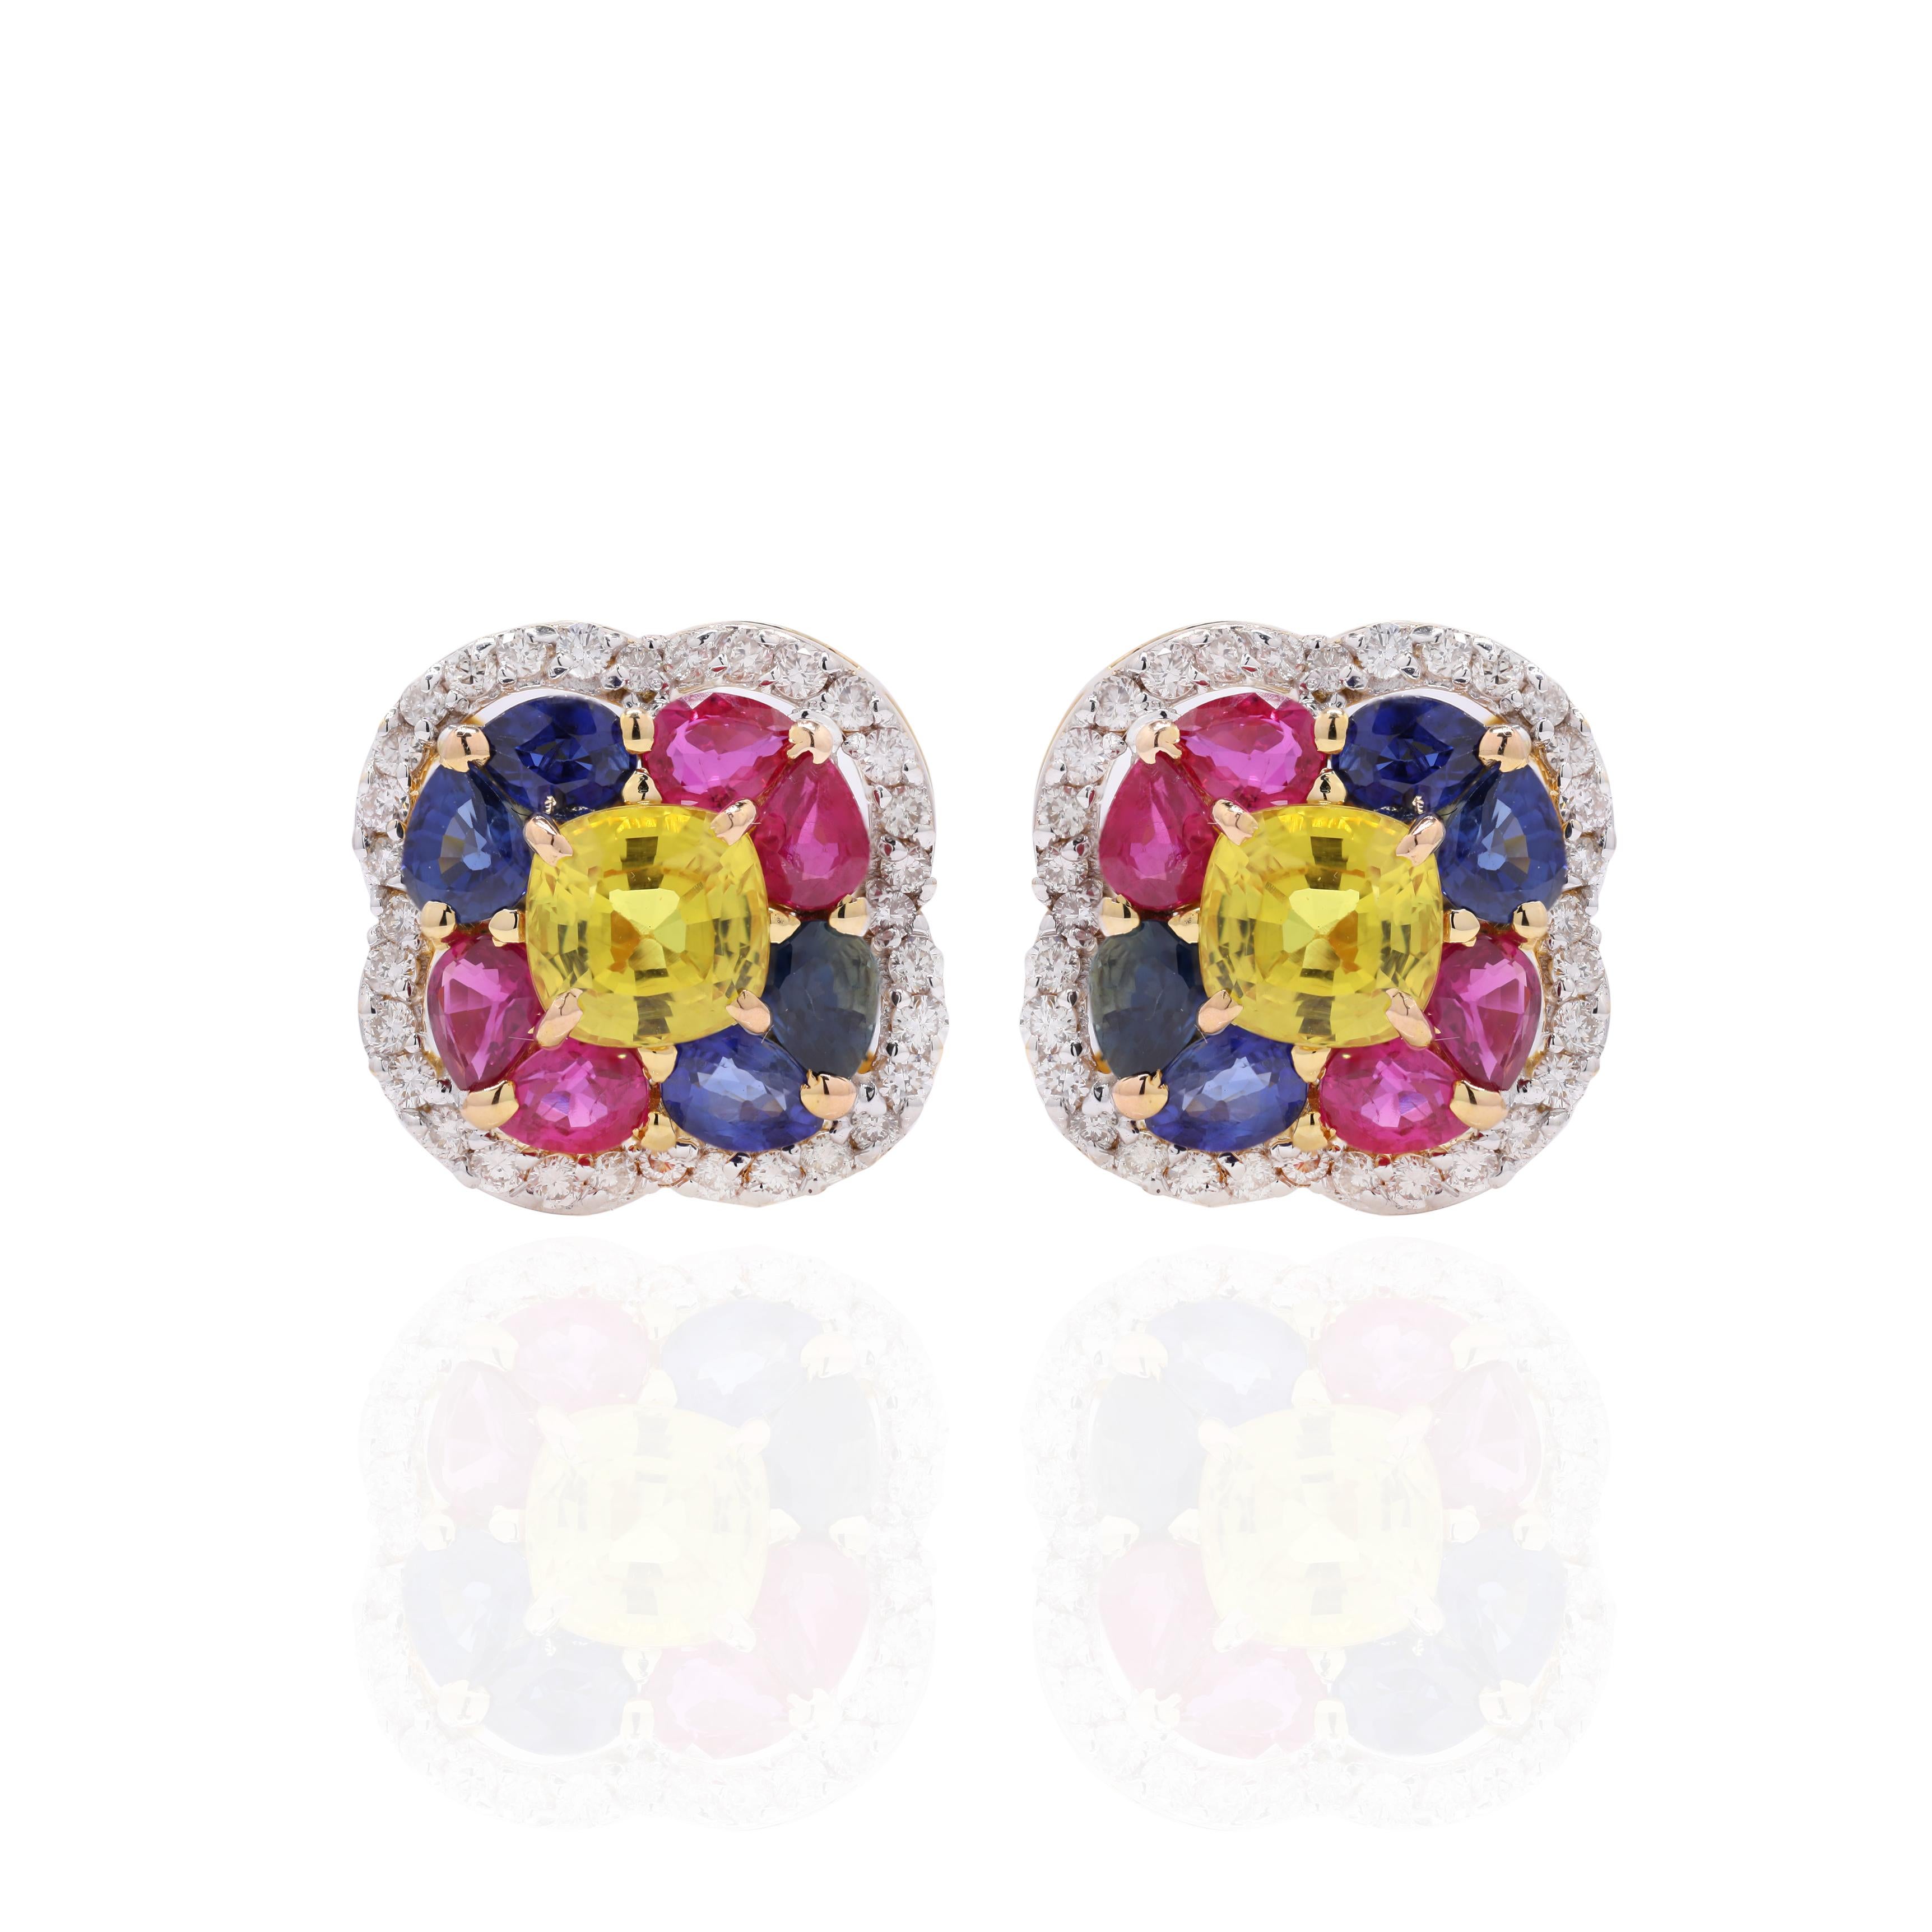 Earrings create a subtle beauty while showcasing the colors of the natural precious gemstones and illuminating diamonds making a statement.
Pear and cushion cut multi sapphire studs with diamonds in 18K gold. Embrace your look with these stunning